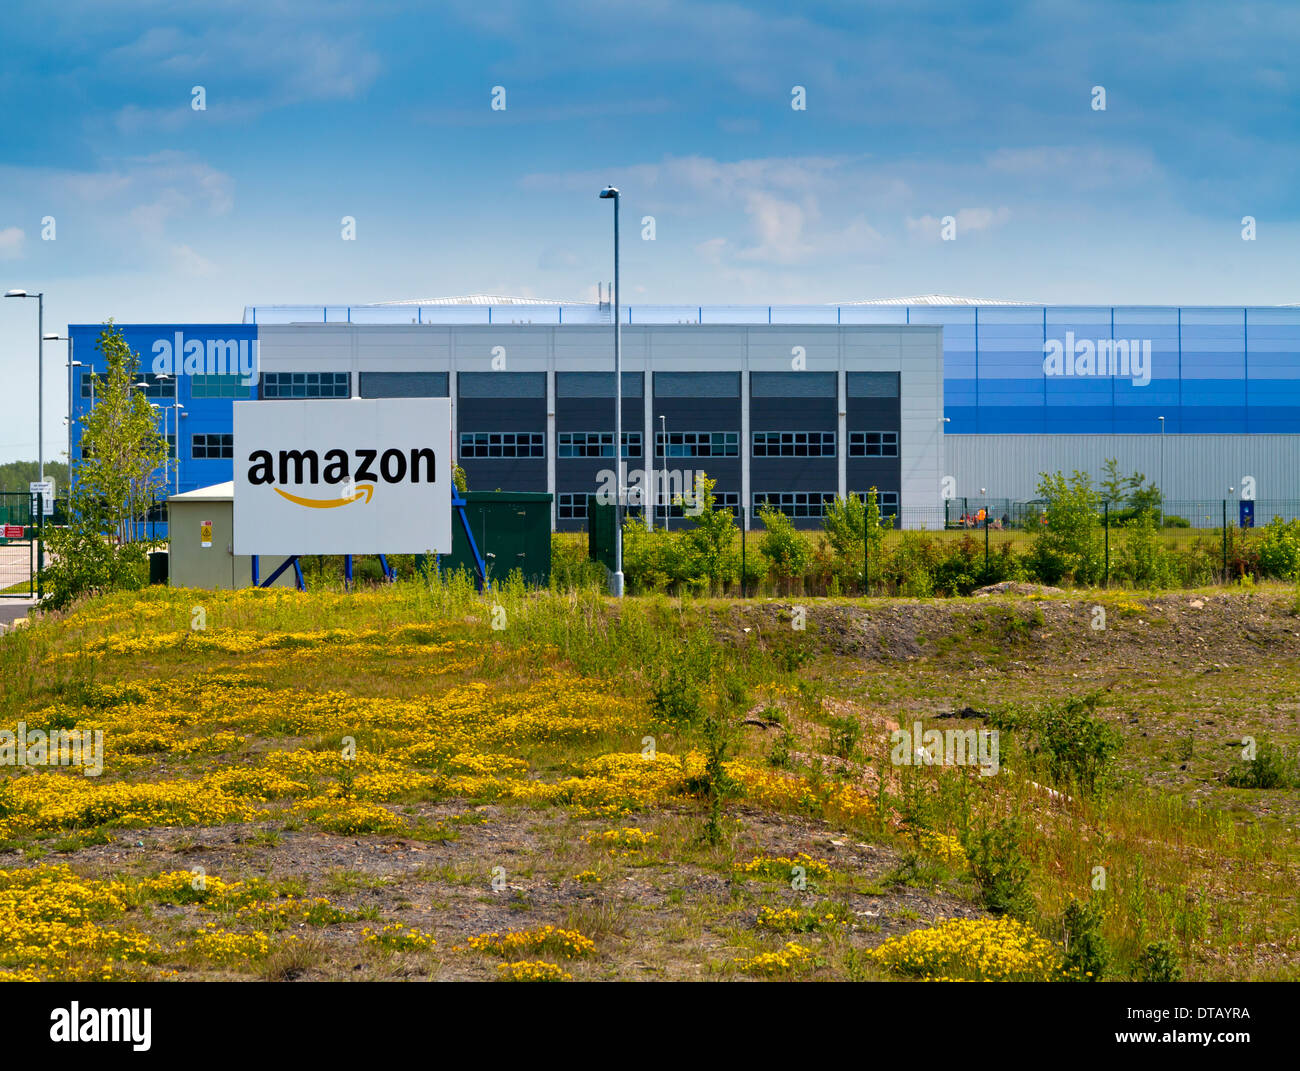 Amazon warehouse on the Towers Business Park Rugeley Staffordshire England UK built on the brownfield site of a former colliery Stock Photo